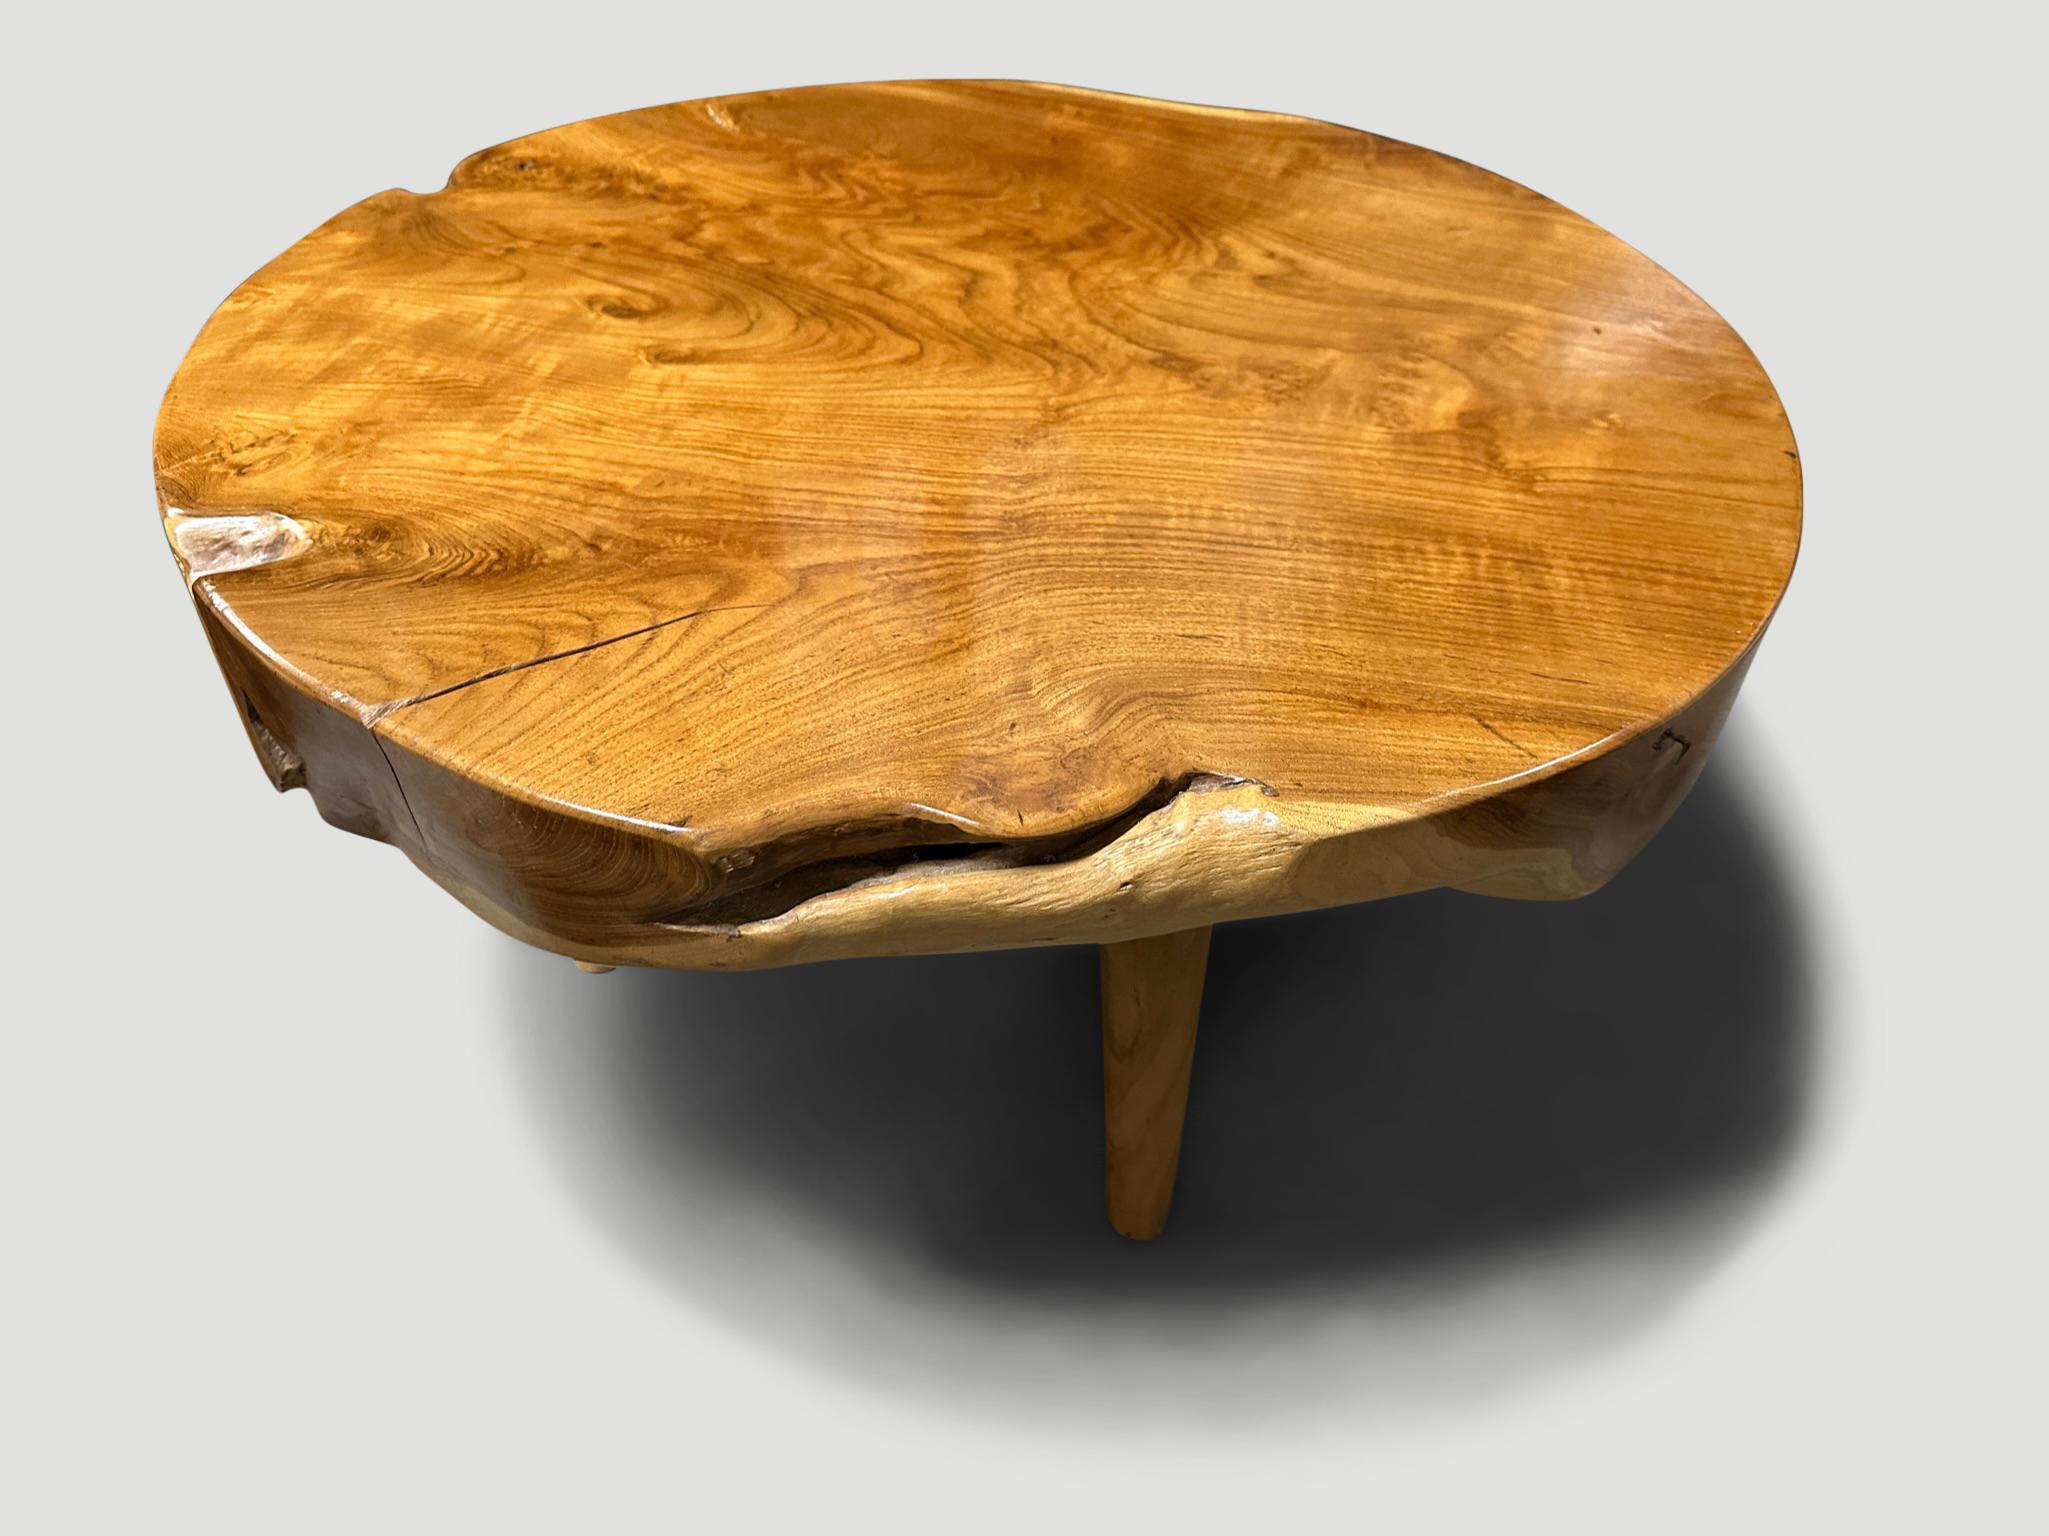 Impressive four inch reclaimed teak wood single slab coffee table. Floating on mid century style cone legs and finished with a natural oil revealing the beautiful wood grain. It’s all in the details. 

Own an Andrianna Shamaris original.

Andrianna